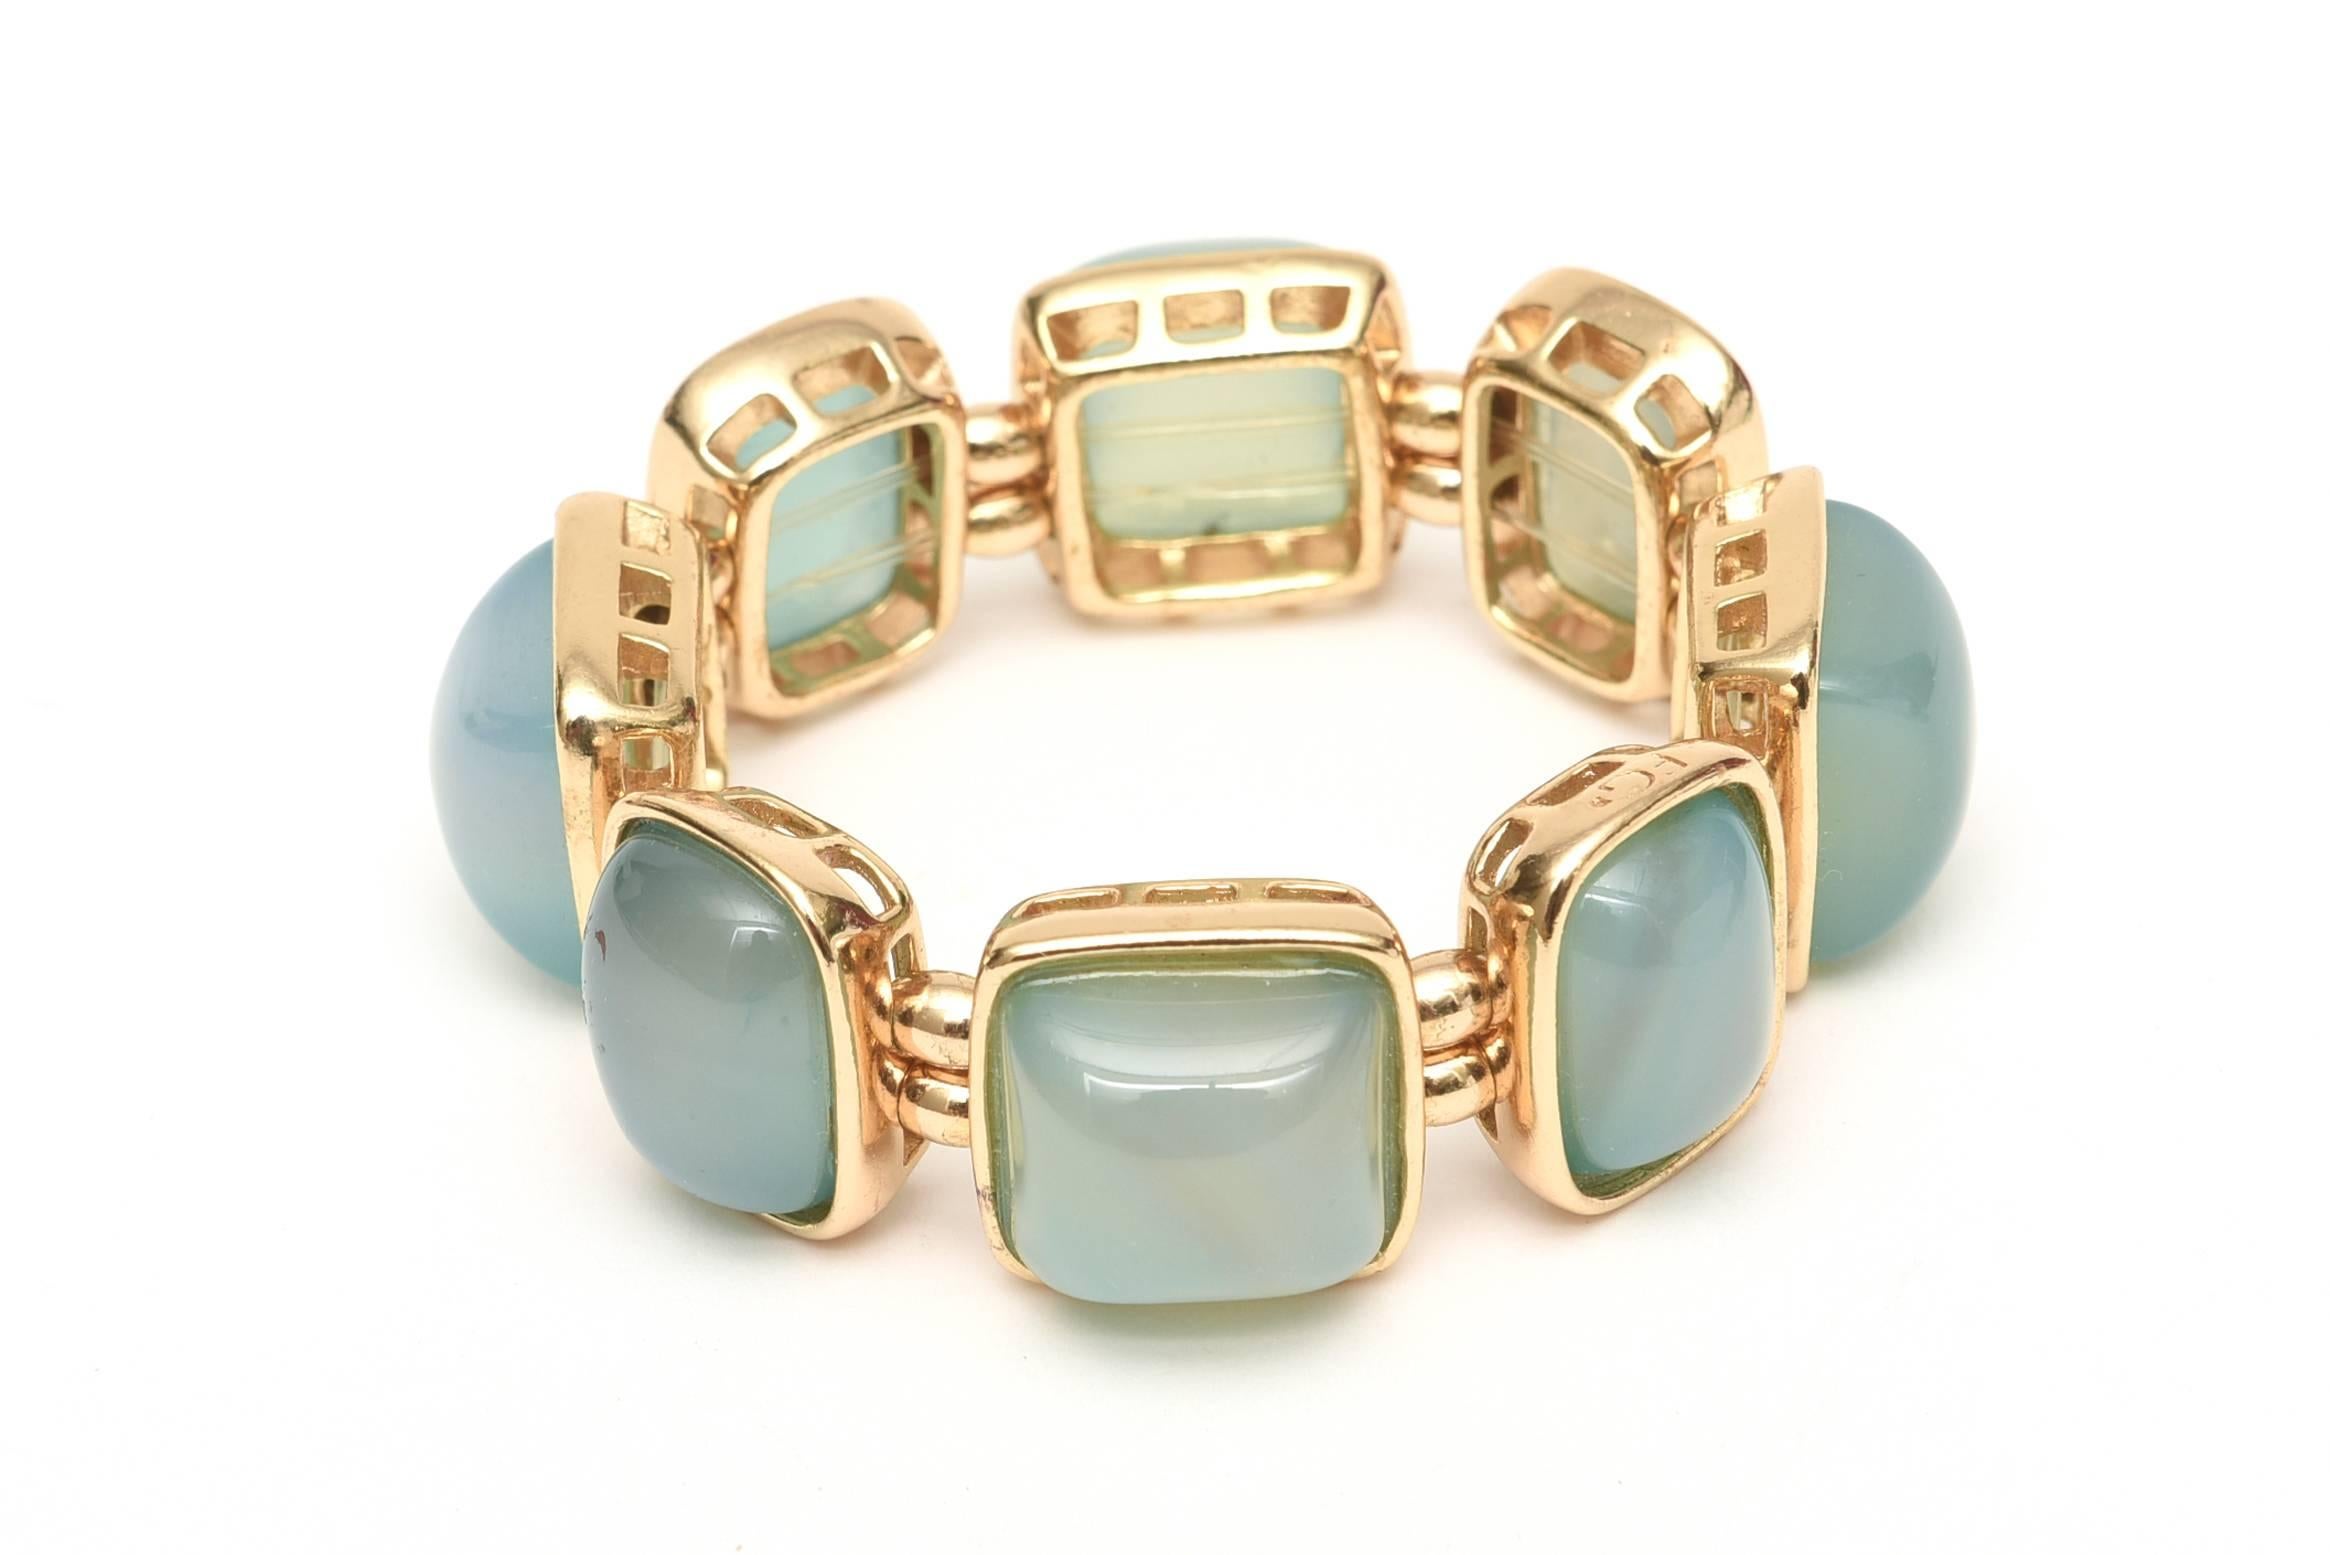 This beautiful bracelet and earrings set is of the blue/turquoise family of chalcedony that is said to have spiritual and healing properties. The color is of the Mediterrean Sea. The stones/agate are of the cabochon form .
It is serene and